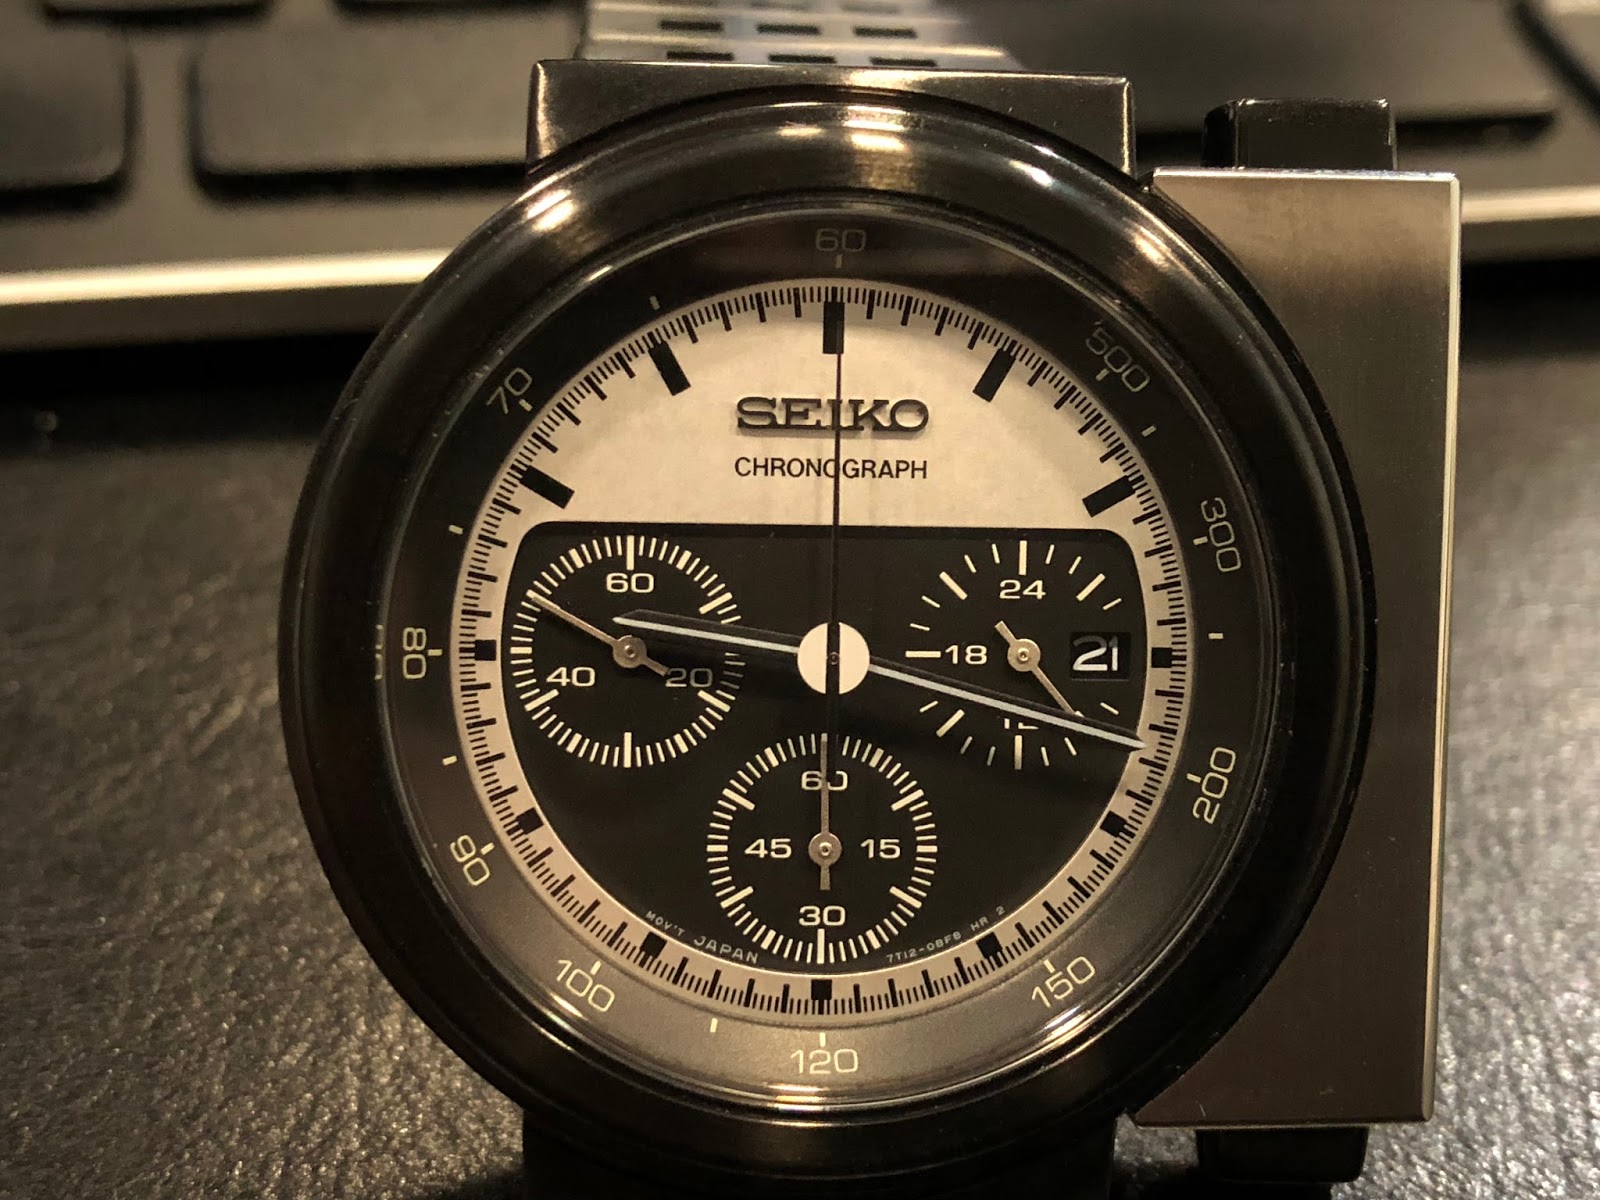 My Eastern Watch Collection: Seiko Spirit Chronograph Giugiaro Design  'Ripley Aliens' Limited Edition SCED041 - Cute and Quirky Timepiece that  Speaks Volume, A Review (plus Video)